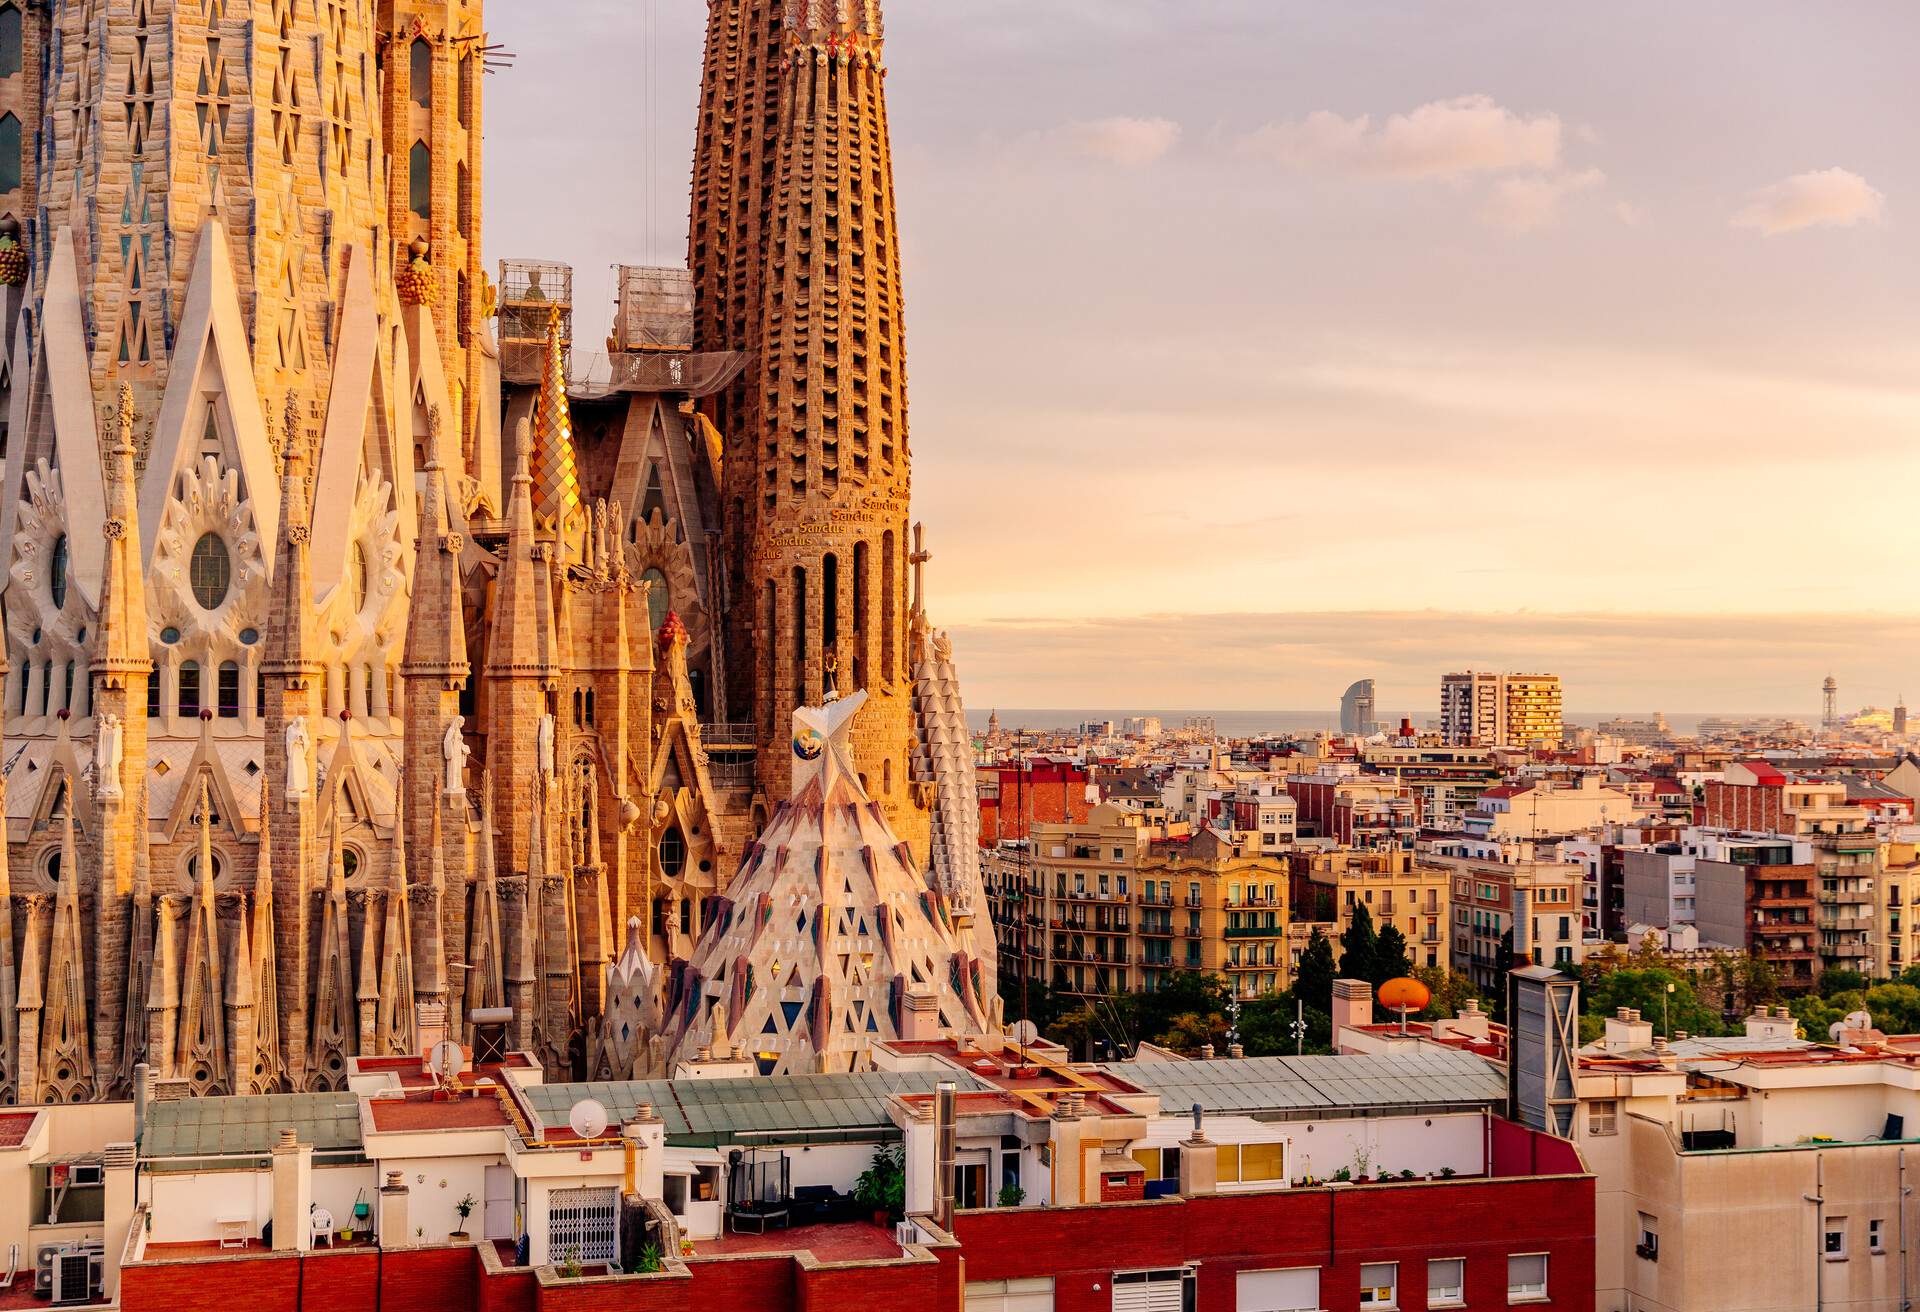 The grand Sagrada Familia towering over nearby buildings and houses.